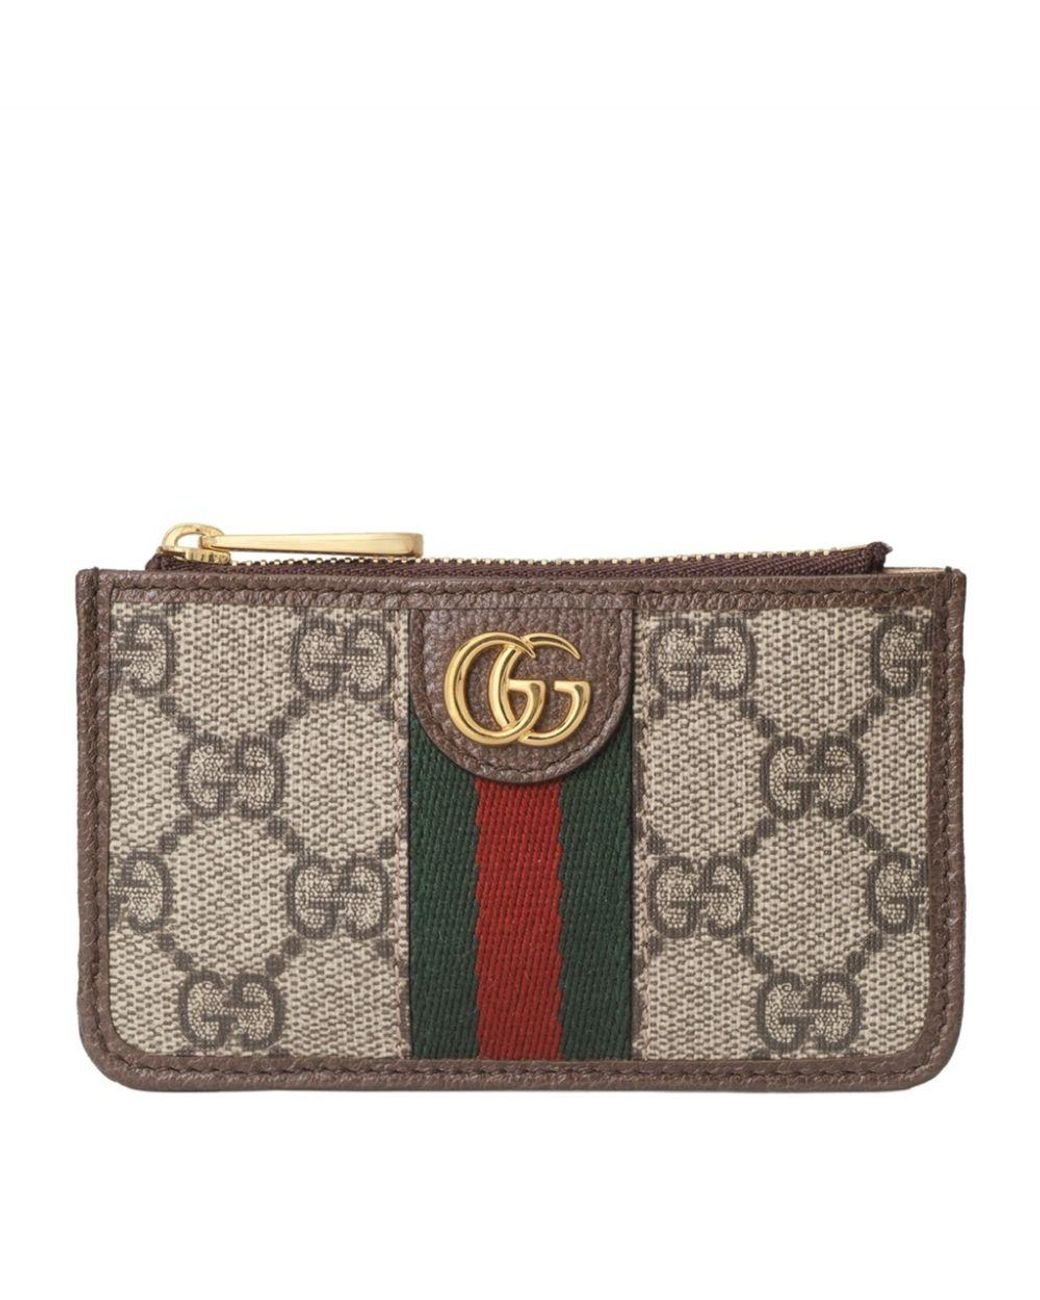 Gucci Ophidia gg Credit Card Case in Brown | Lyst